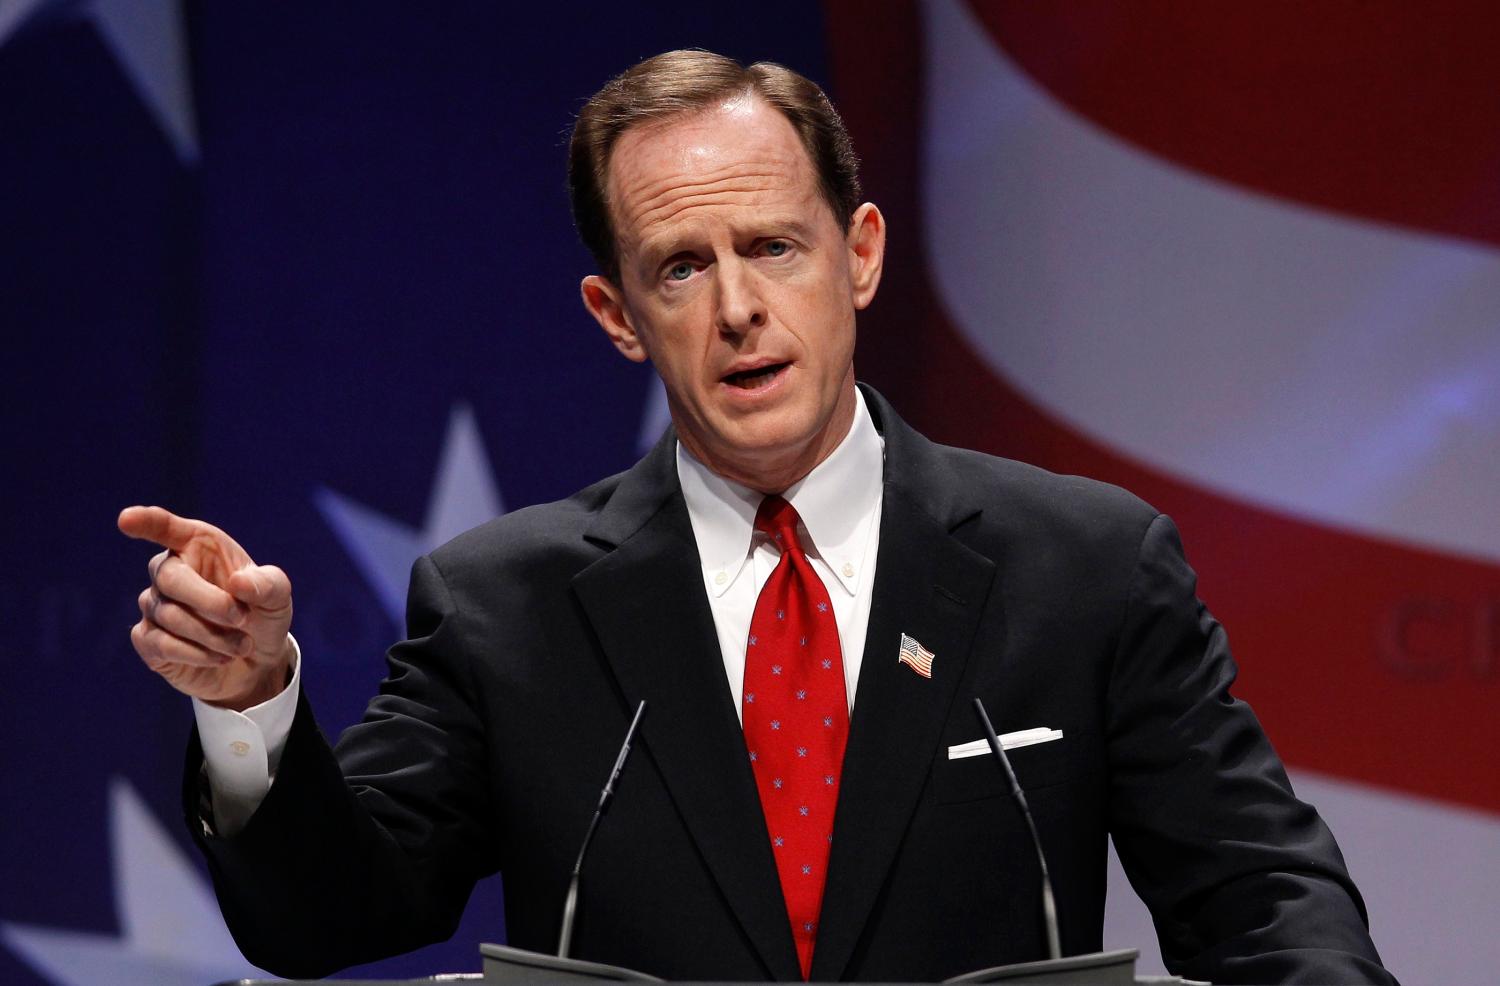 FILE PHOTO -- U.S. Senator Pat Toomey (R-PA) speaks to the 38th annual Conservative Political Action Conference meeting in Washington DC, U.S. February 10, 2011. REUTERS/Larry Downing/File Photo - RTSNYT5